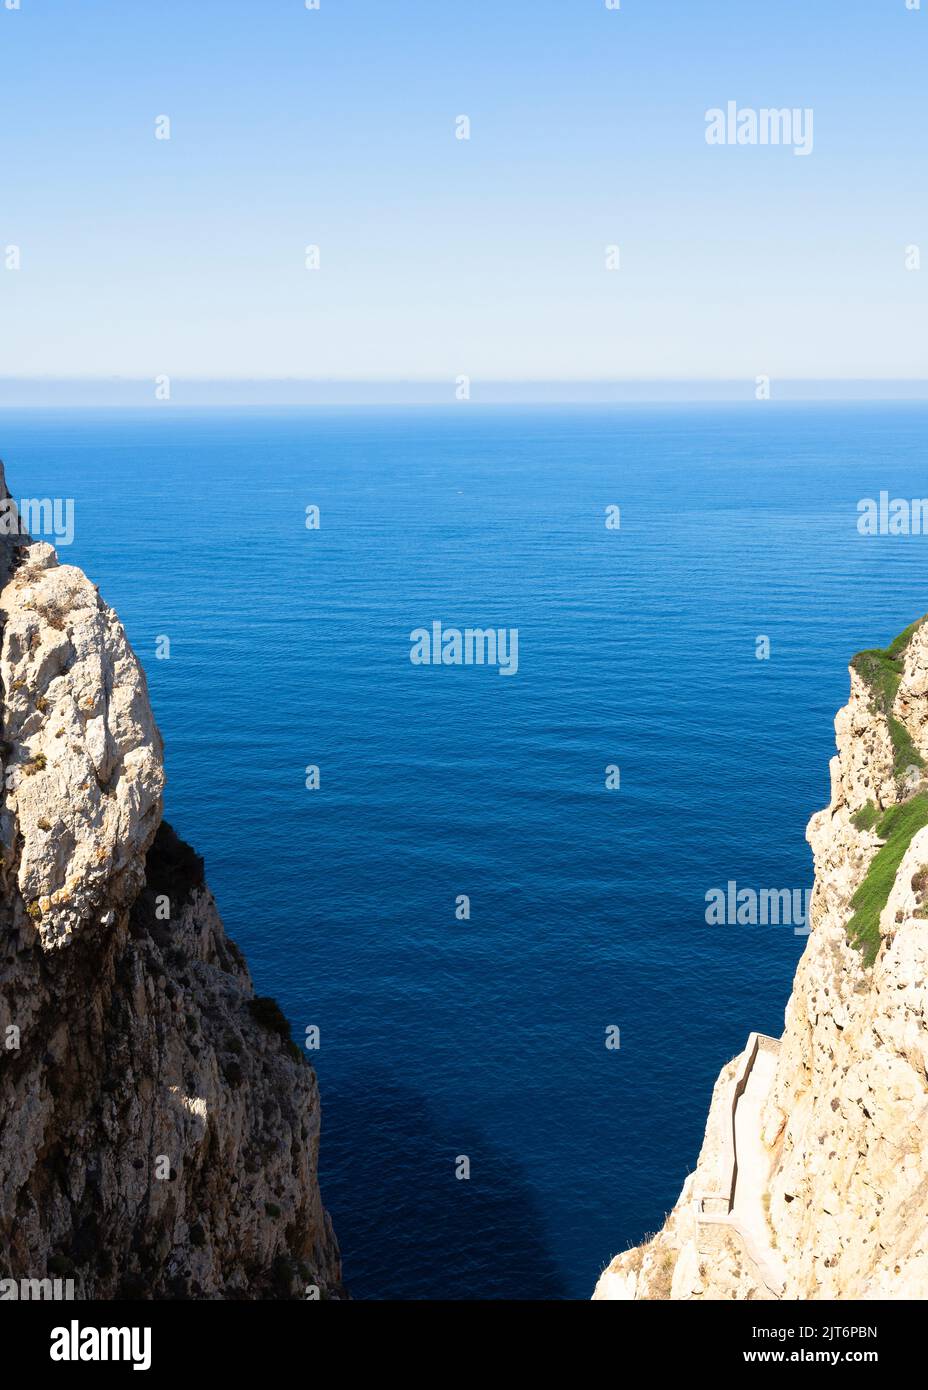 Vertical view of a gorge with cliffs on both sides and a sea inlet. Sunny midday with a turquoise Mediterranean Sea and blue sky on the horizon. Stock Photo